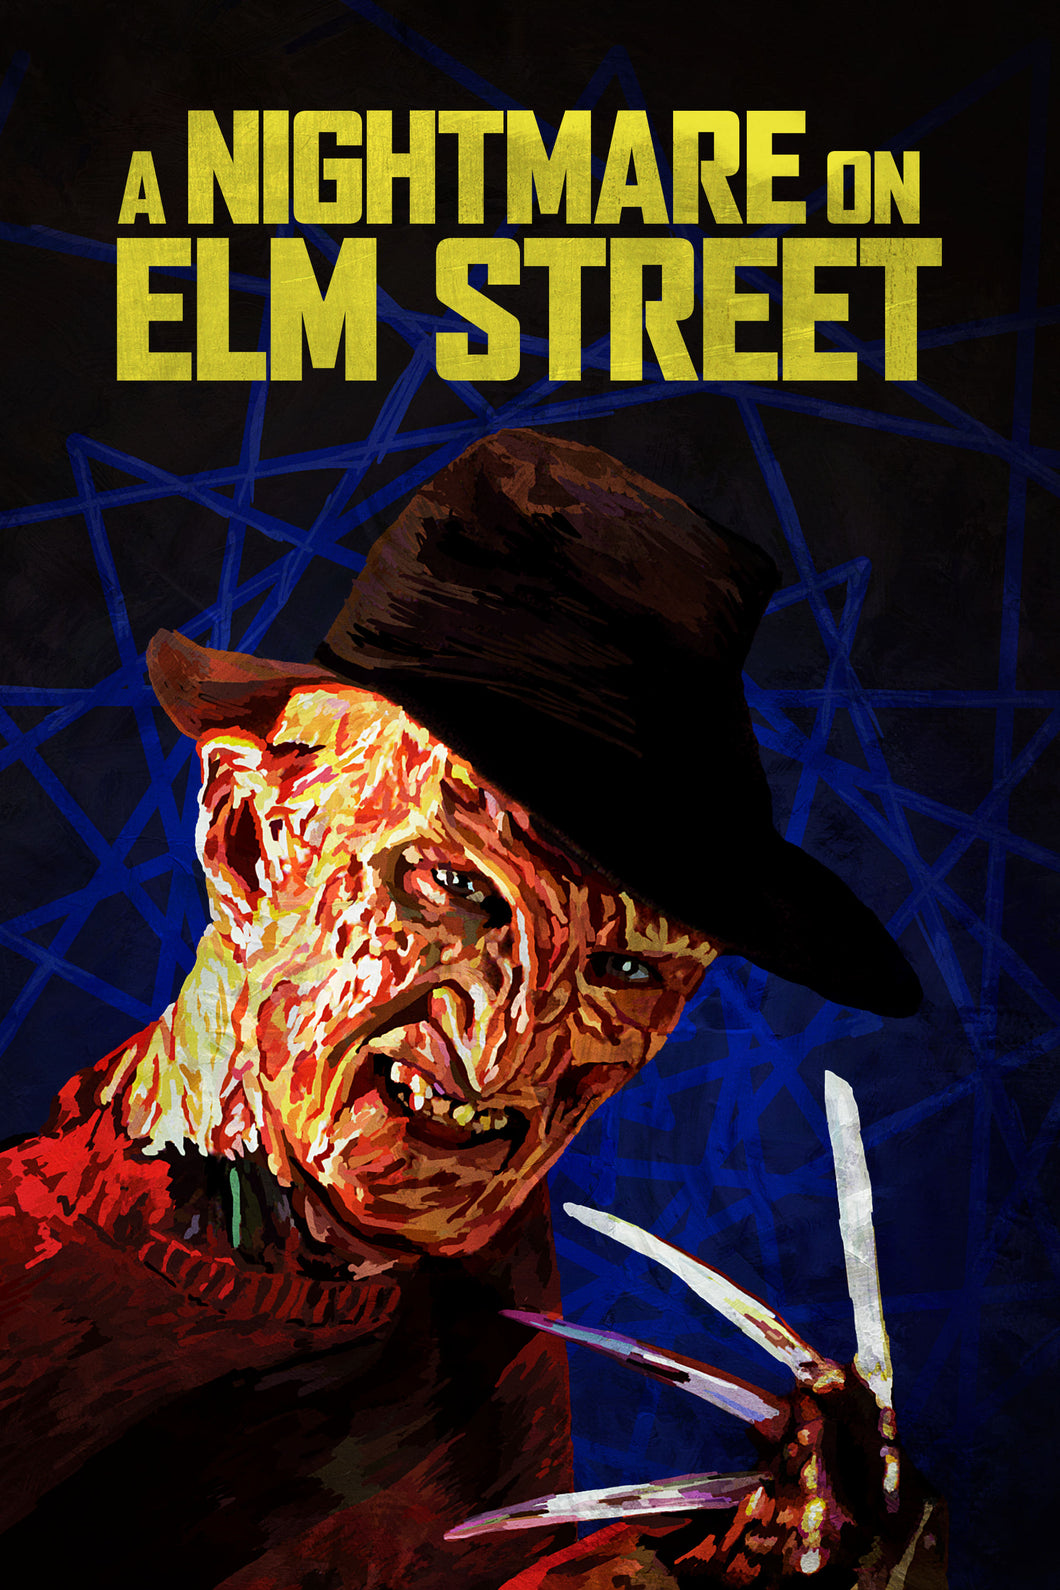 A Nightmare on Elm Street (1984)v3 Movie Poster High Quality Glossy Paper A1 A2 A3 A4 A3 Framed or Unframed!!!